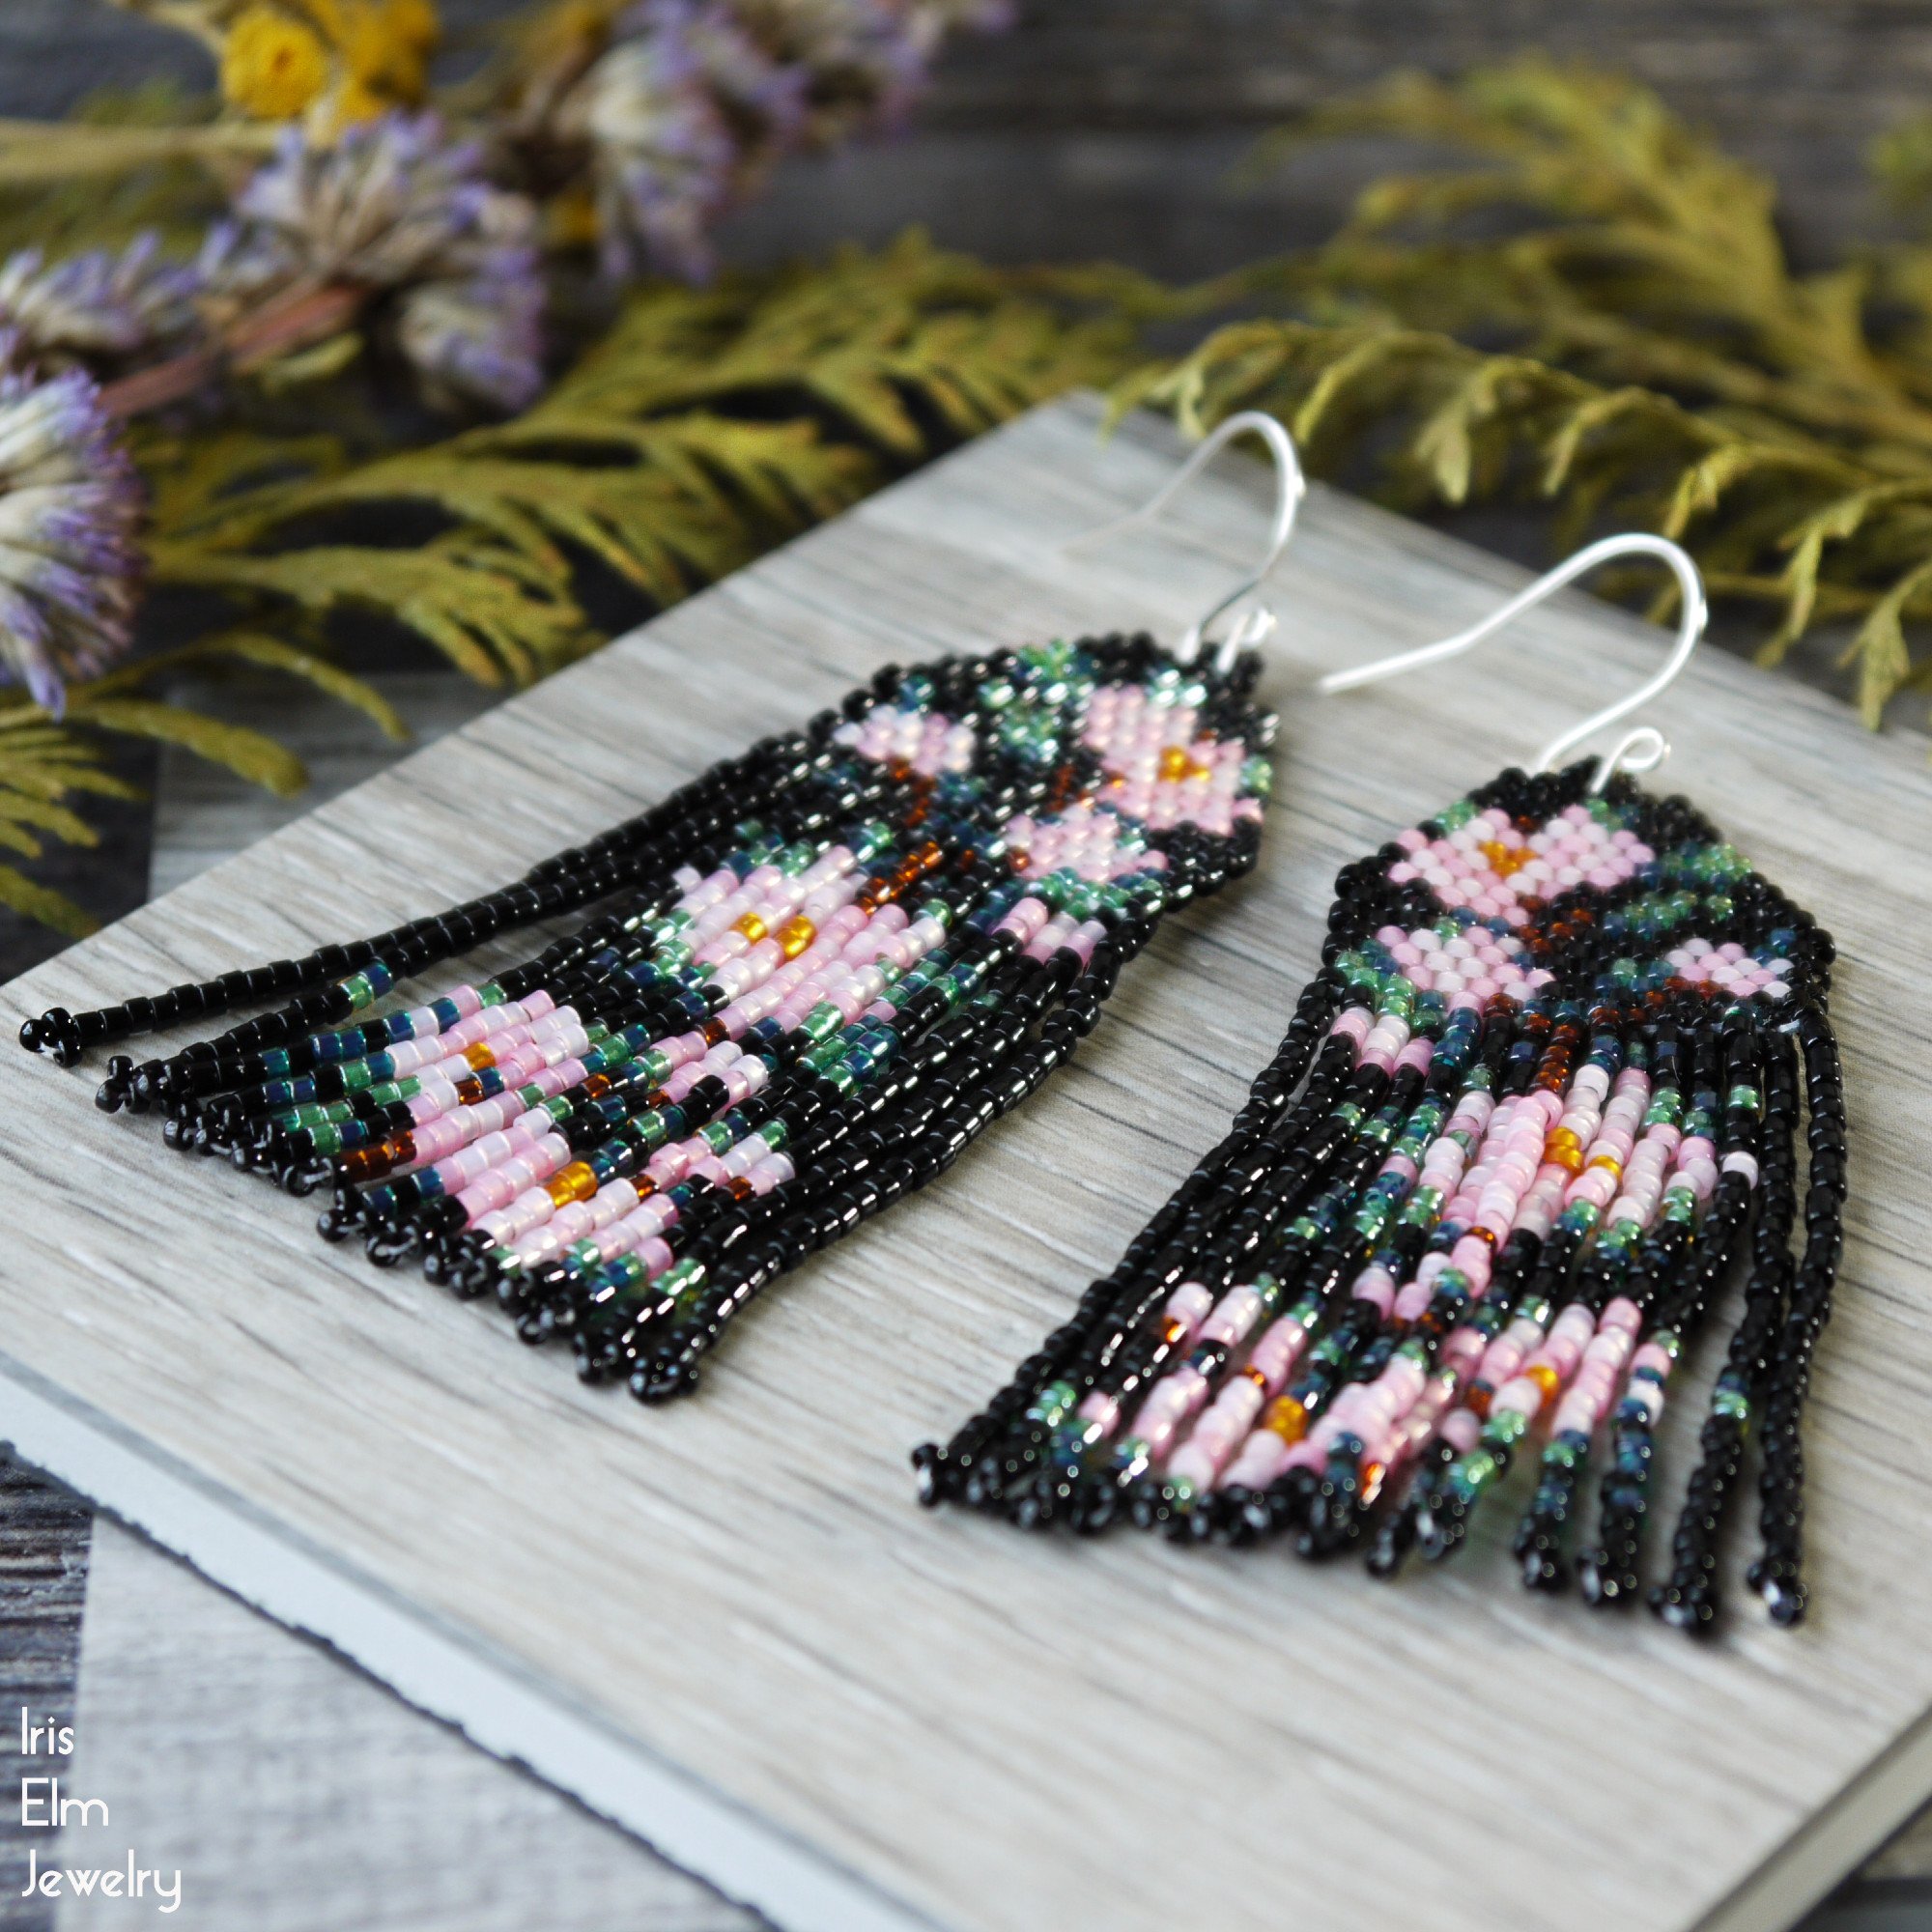 Hook a Fish Fringe Earring Pattern  Instant Download or Printed Copy   Spoilt Rotten Beads